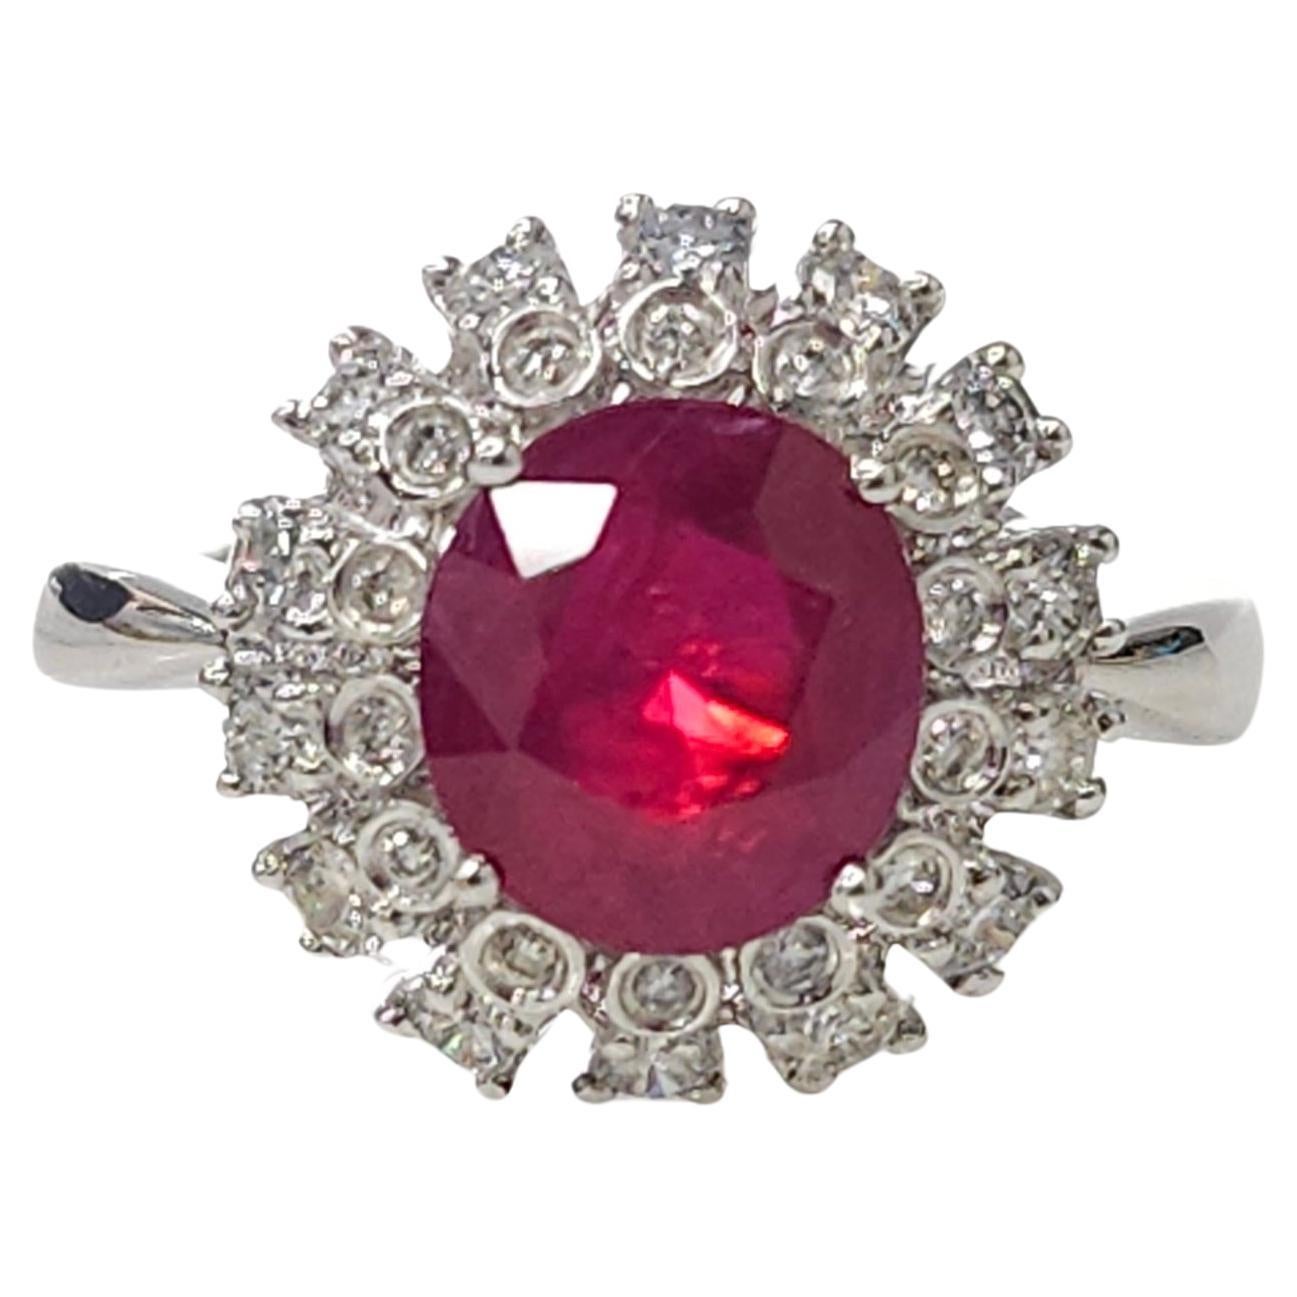 Introducing a magnificent piece of jewelry featuring an IGI Certified 2.91 Carat Ruby, originating from Burma, renowned for its exceptional quality and vivid purplish red color, in a captivating oval shape. This extraordinary gemstone takes center